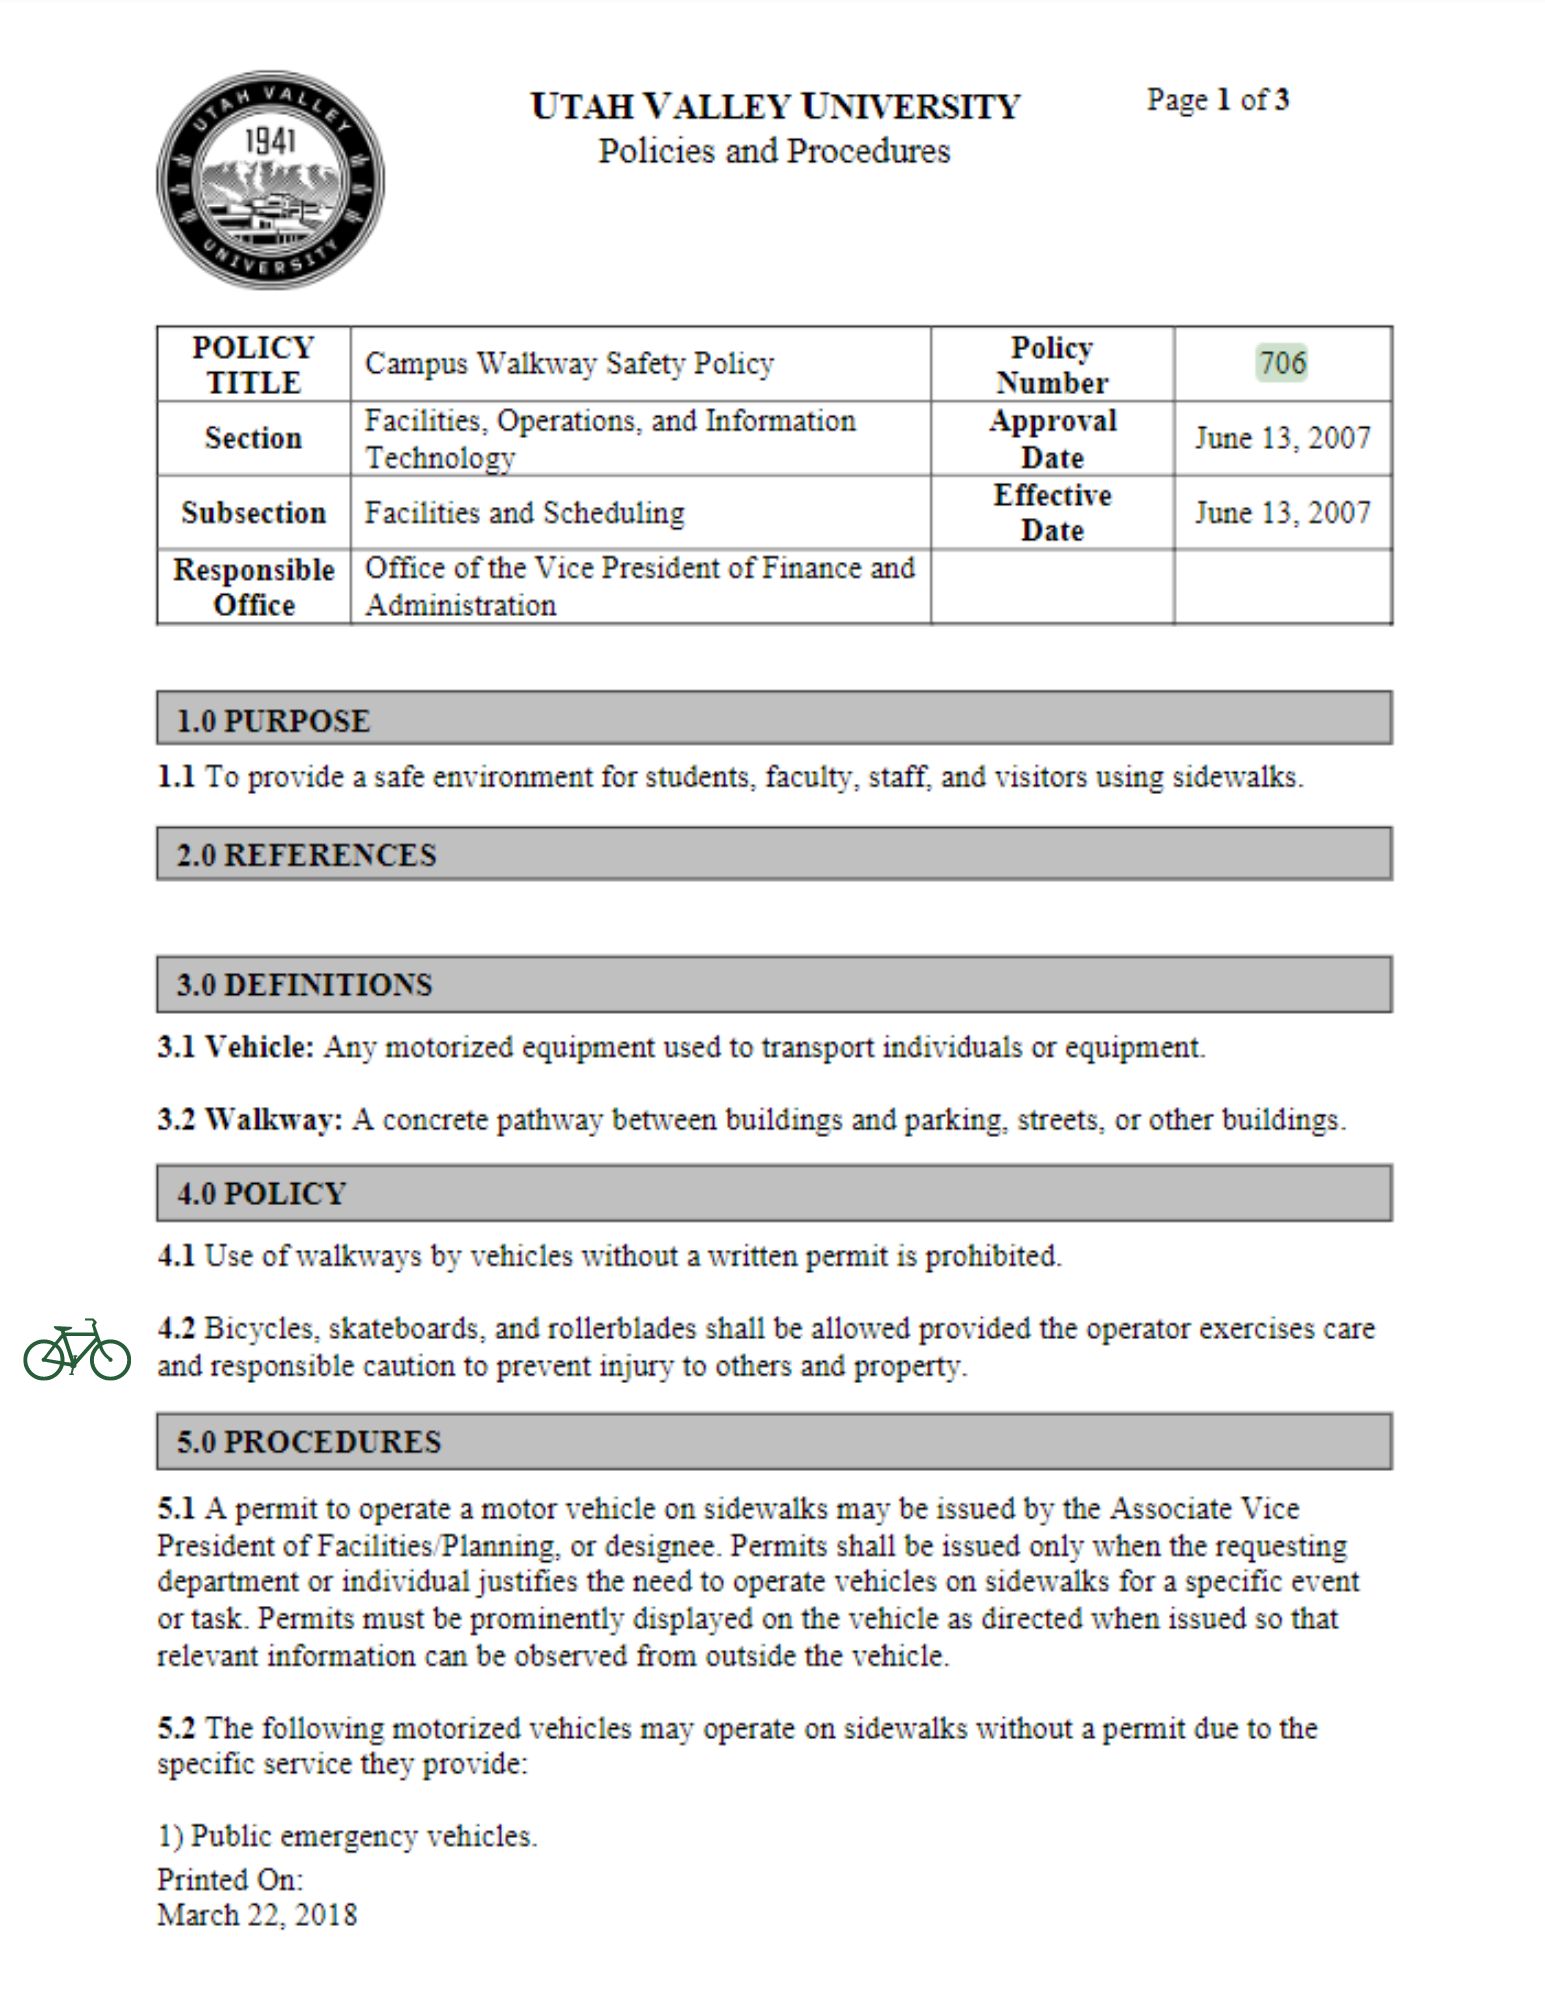 UVU Campus Walkway Safety Policy page one